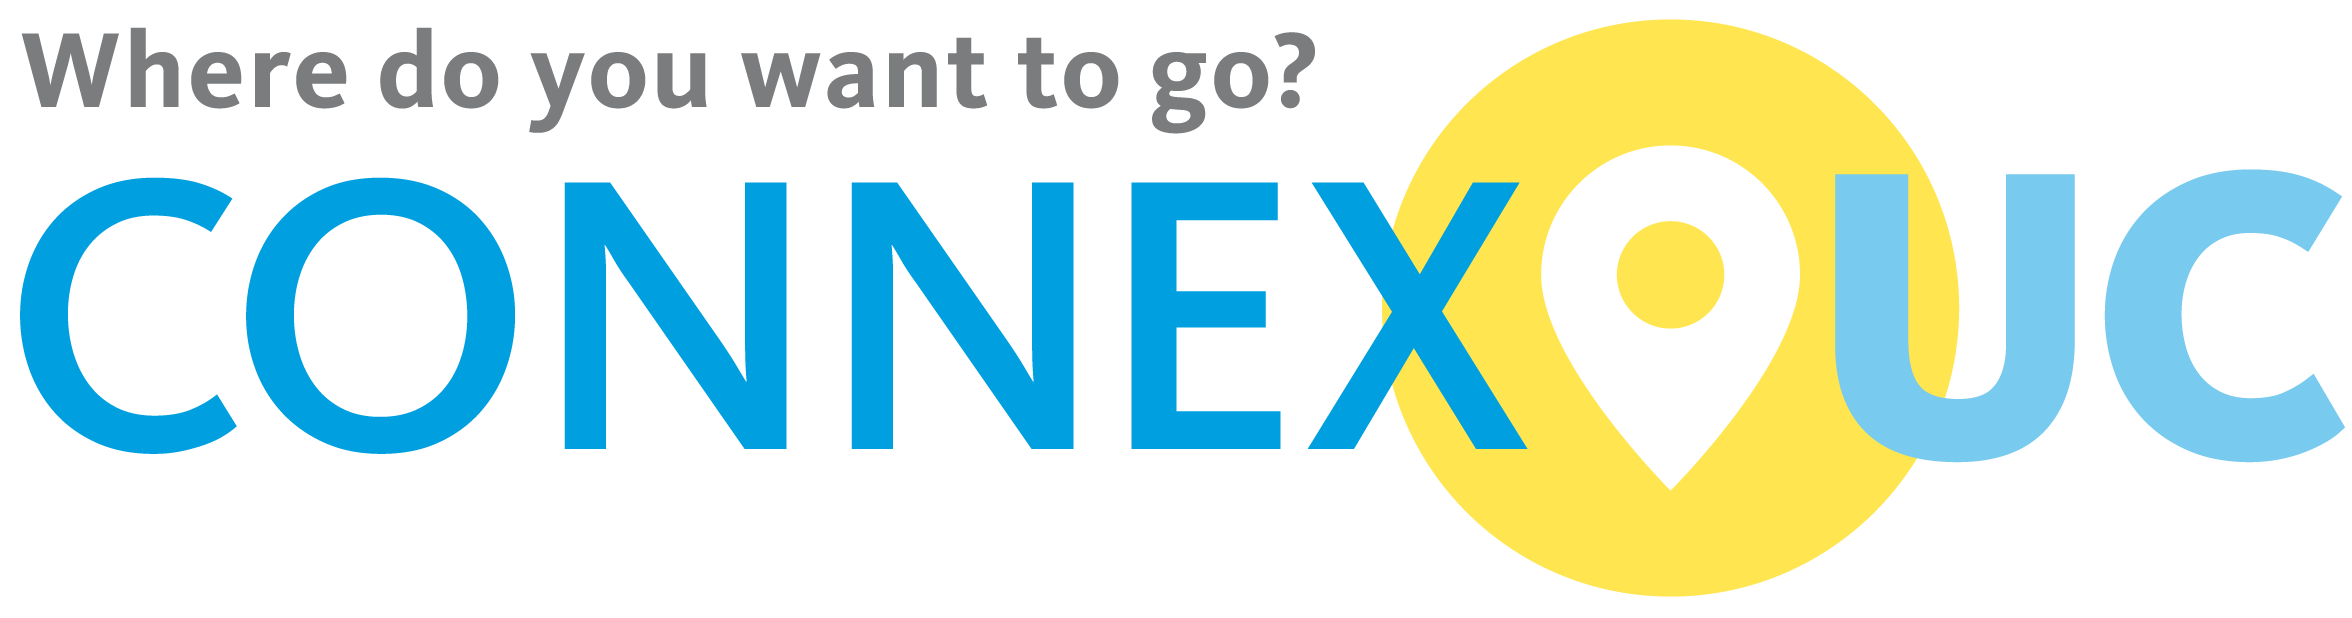 CONNEX UC - Where do you want to go?